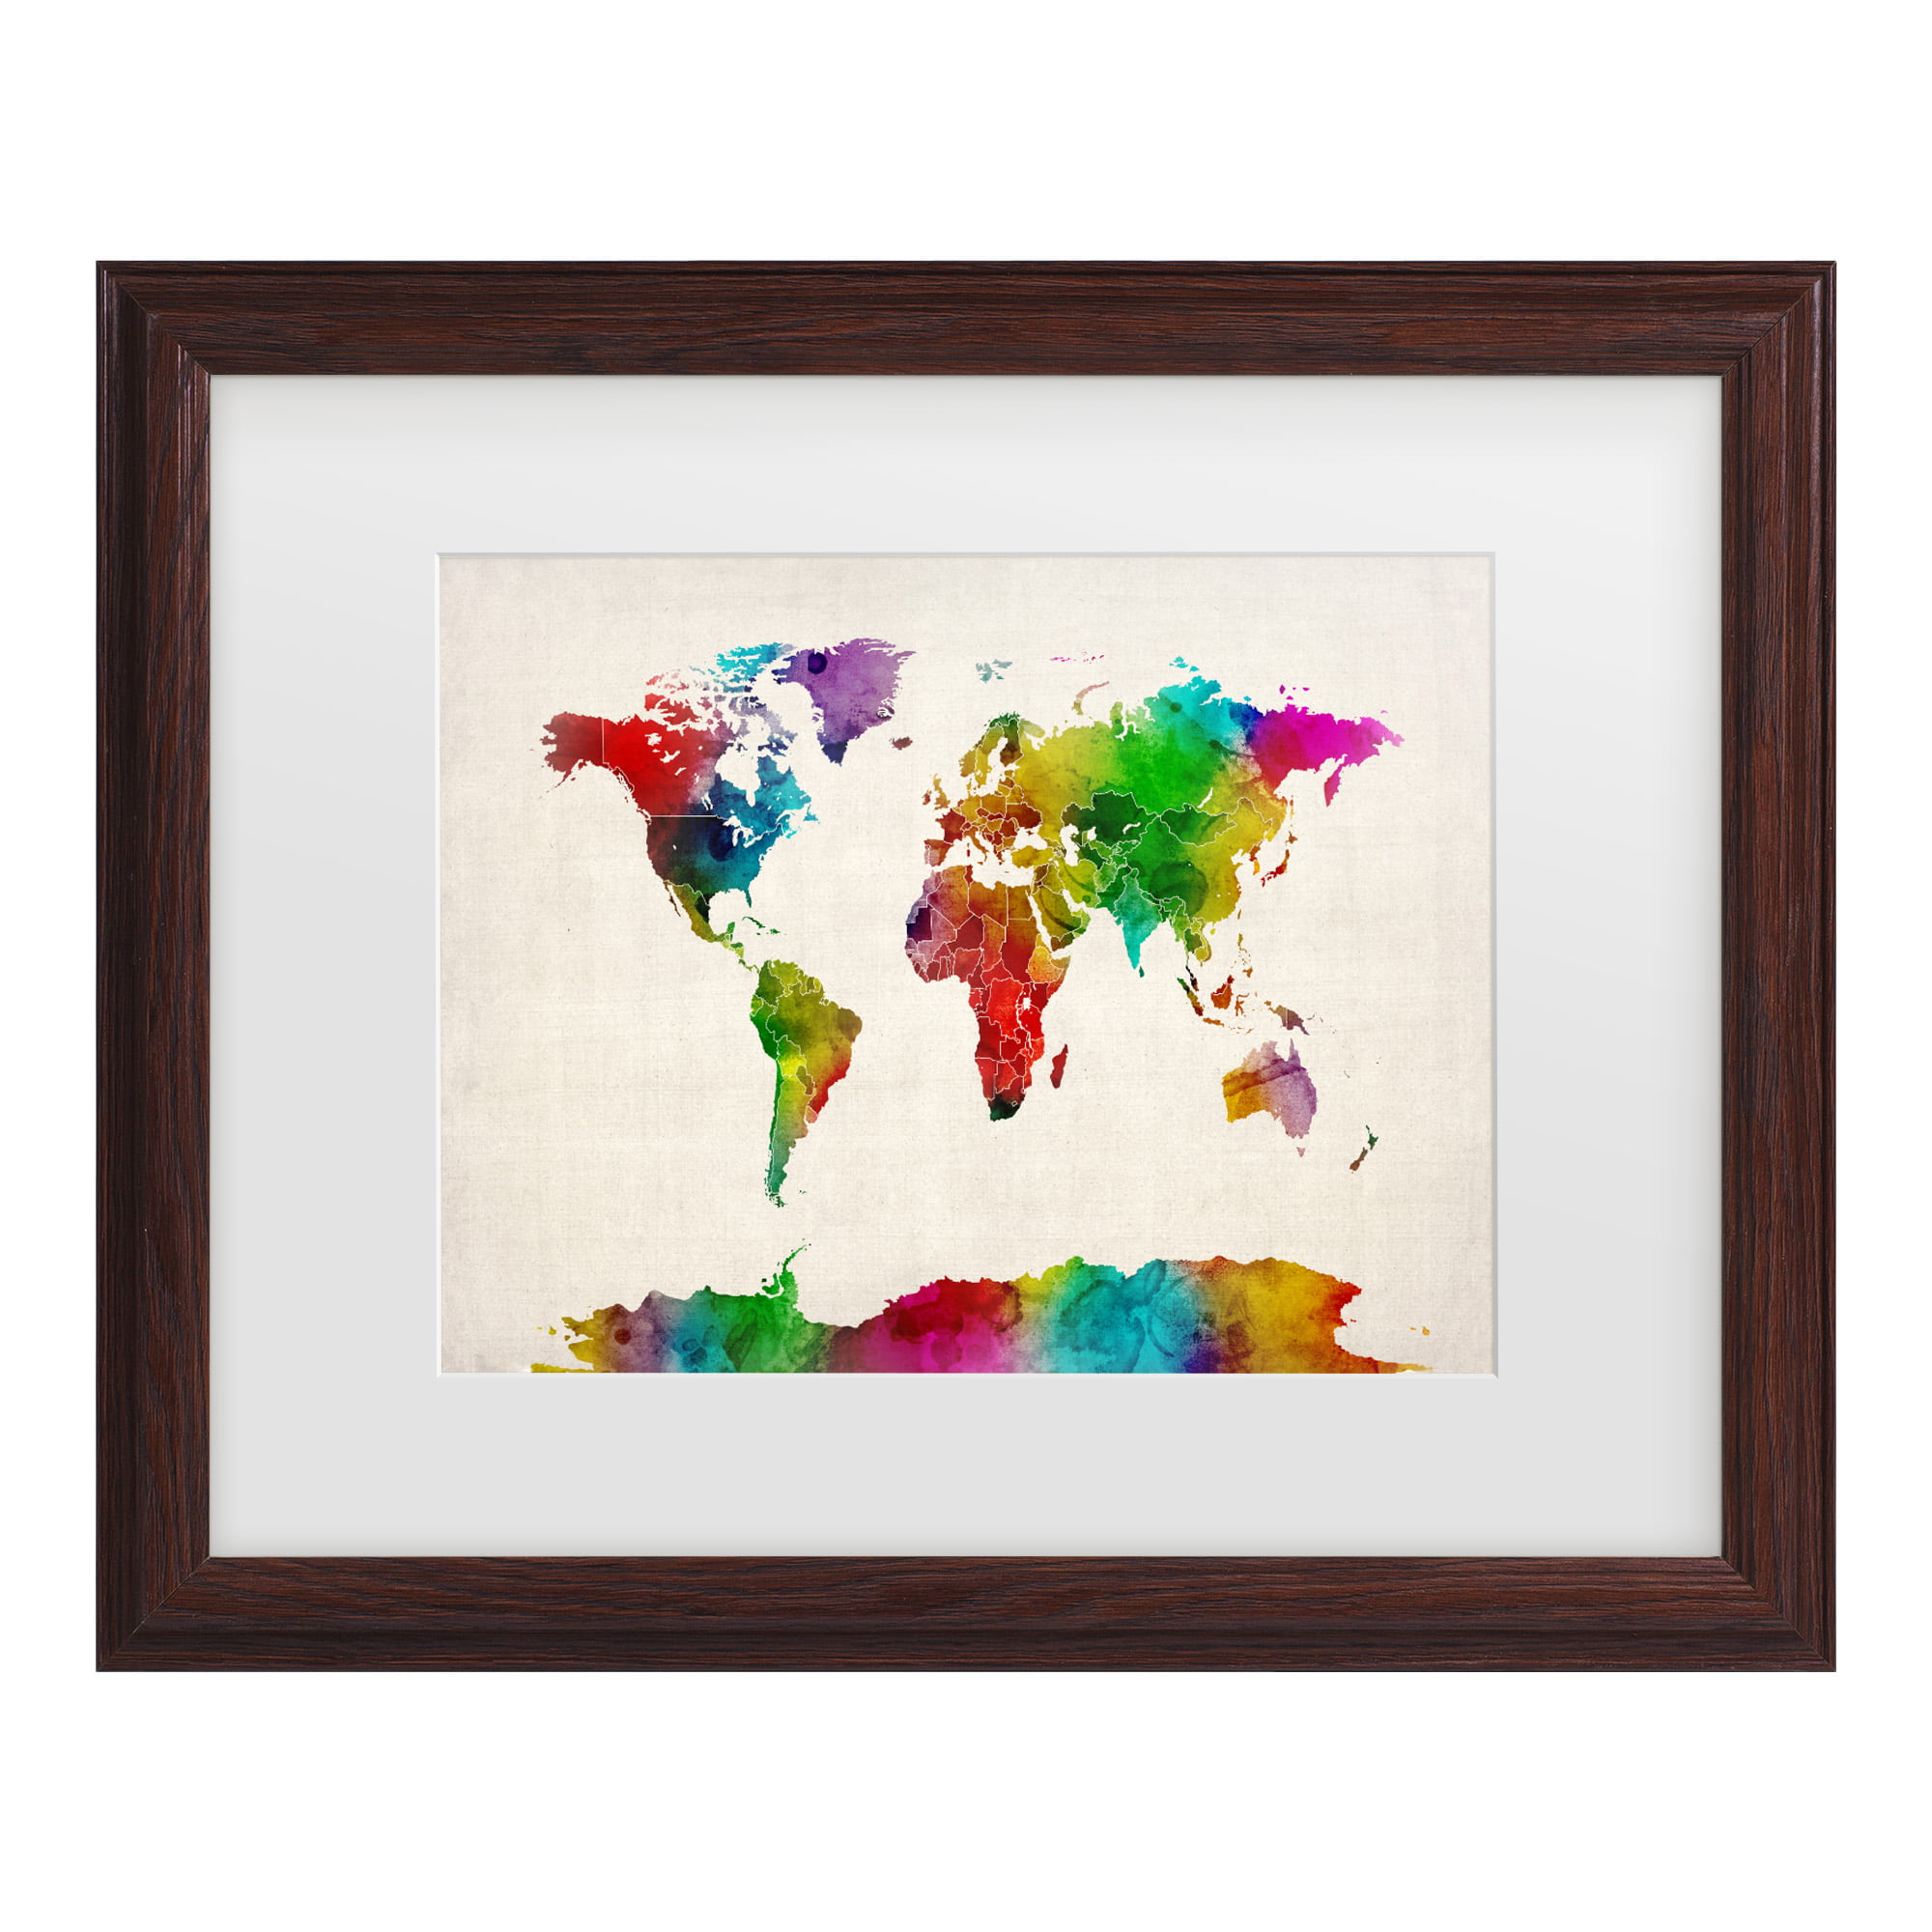 Gold Ornate Frame World Map Canvas Wall Art by Michael Tompsett 16 by 20-Inch Wood Frame